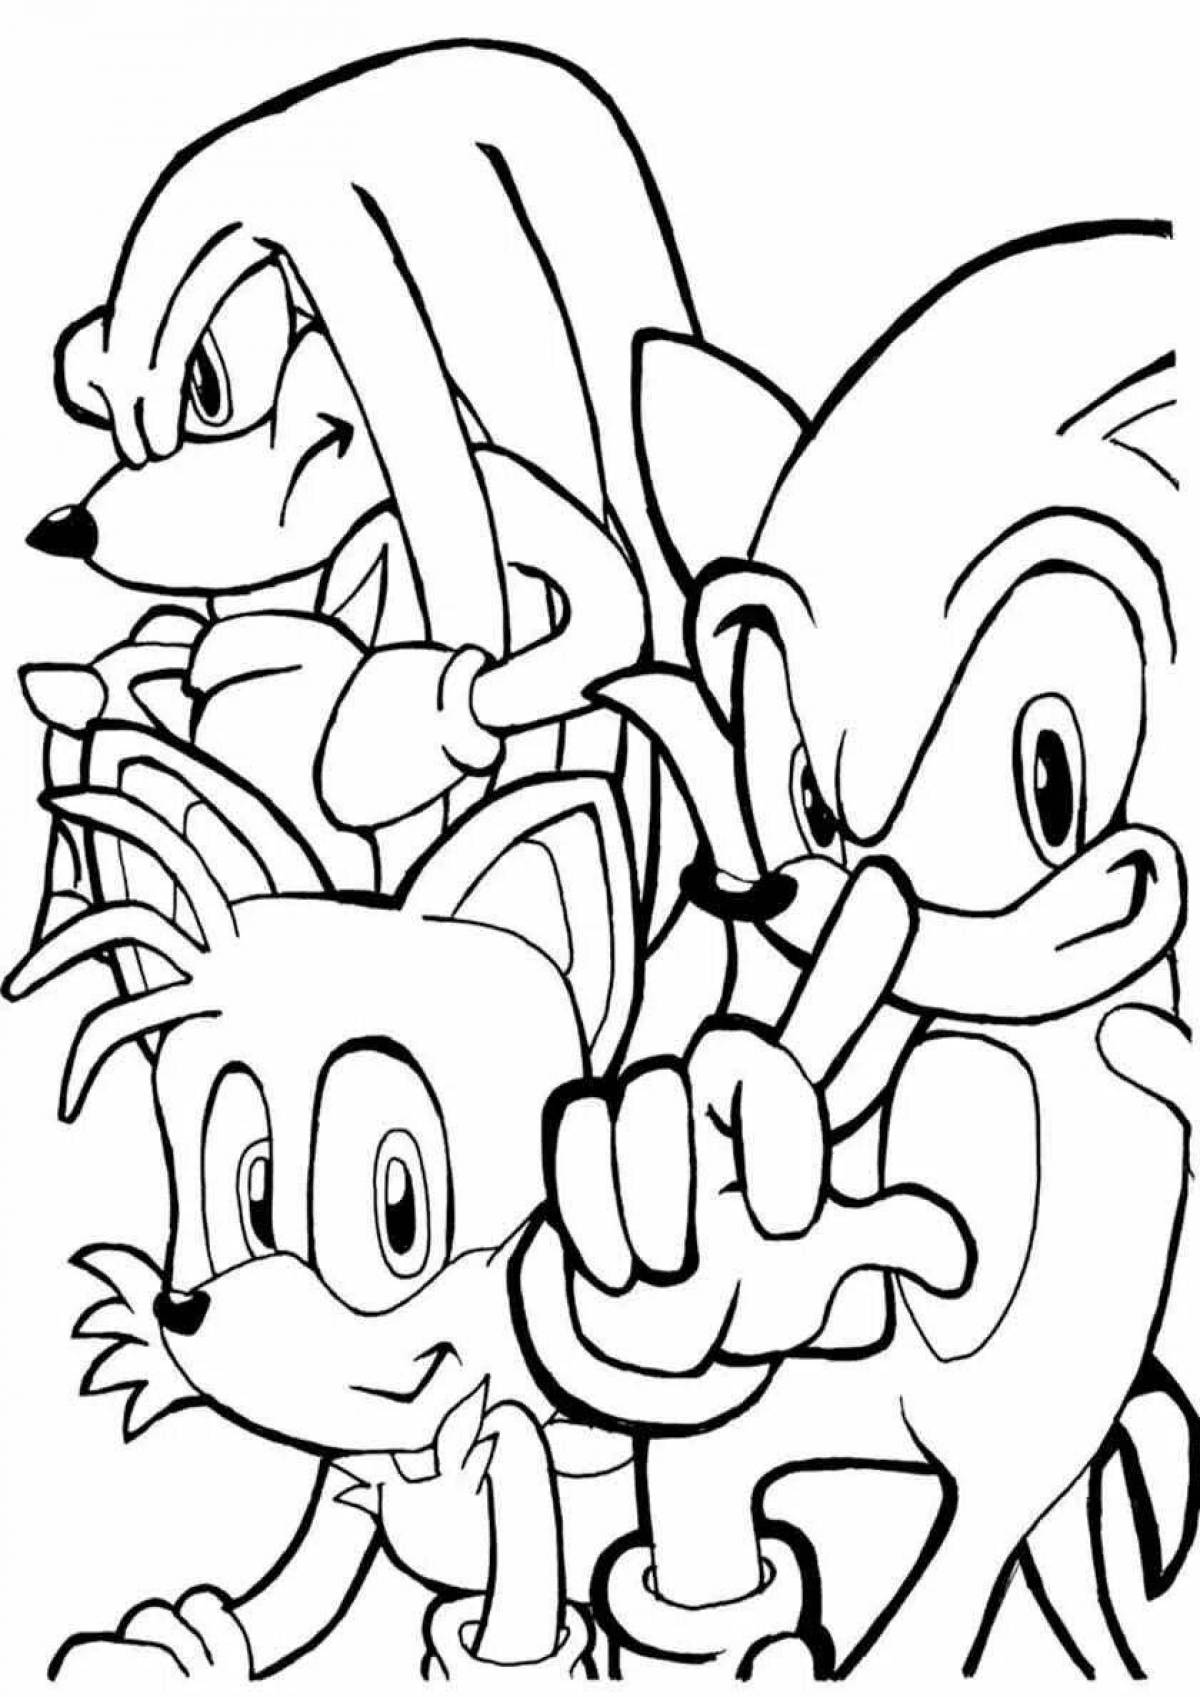 Sonic teos marvelous coloring book